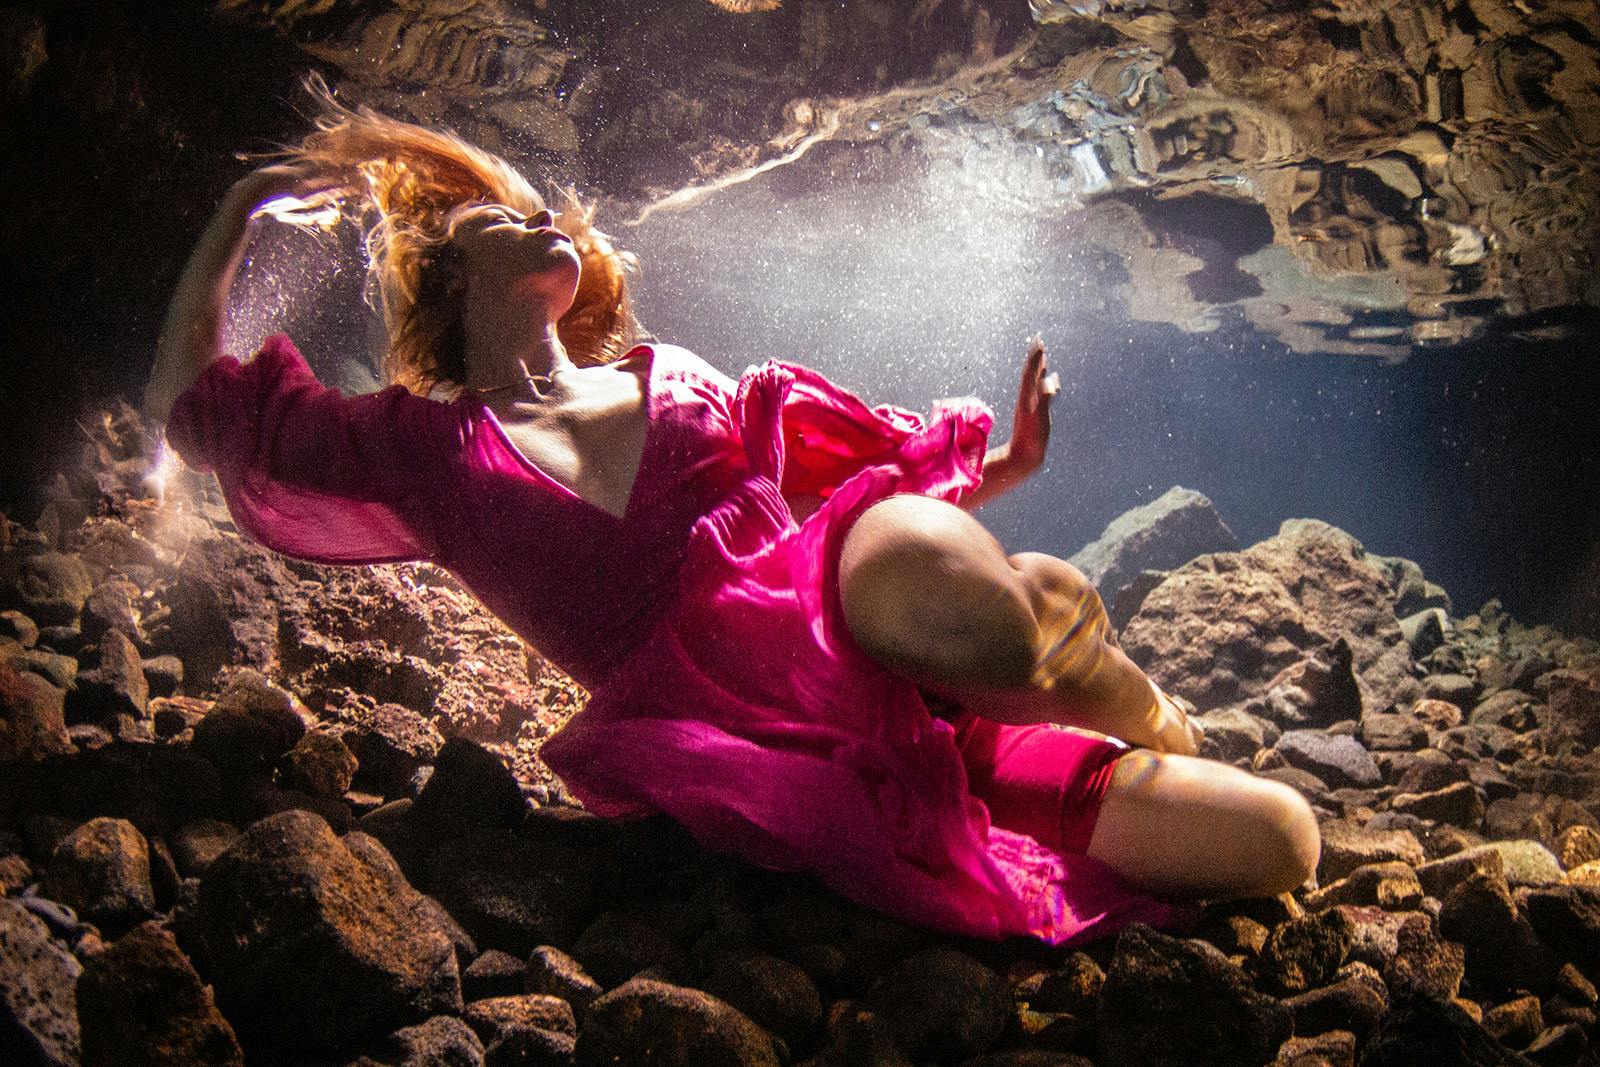 Maui underwater portrait photography packages for lasting memories